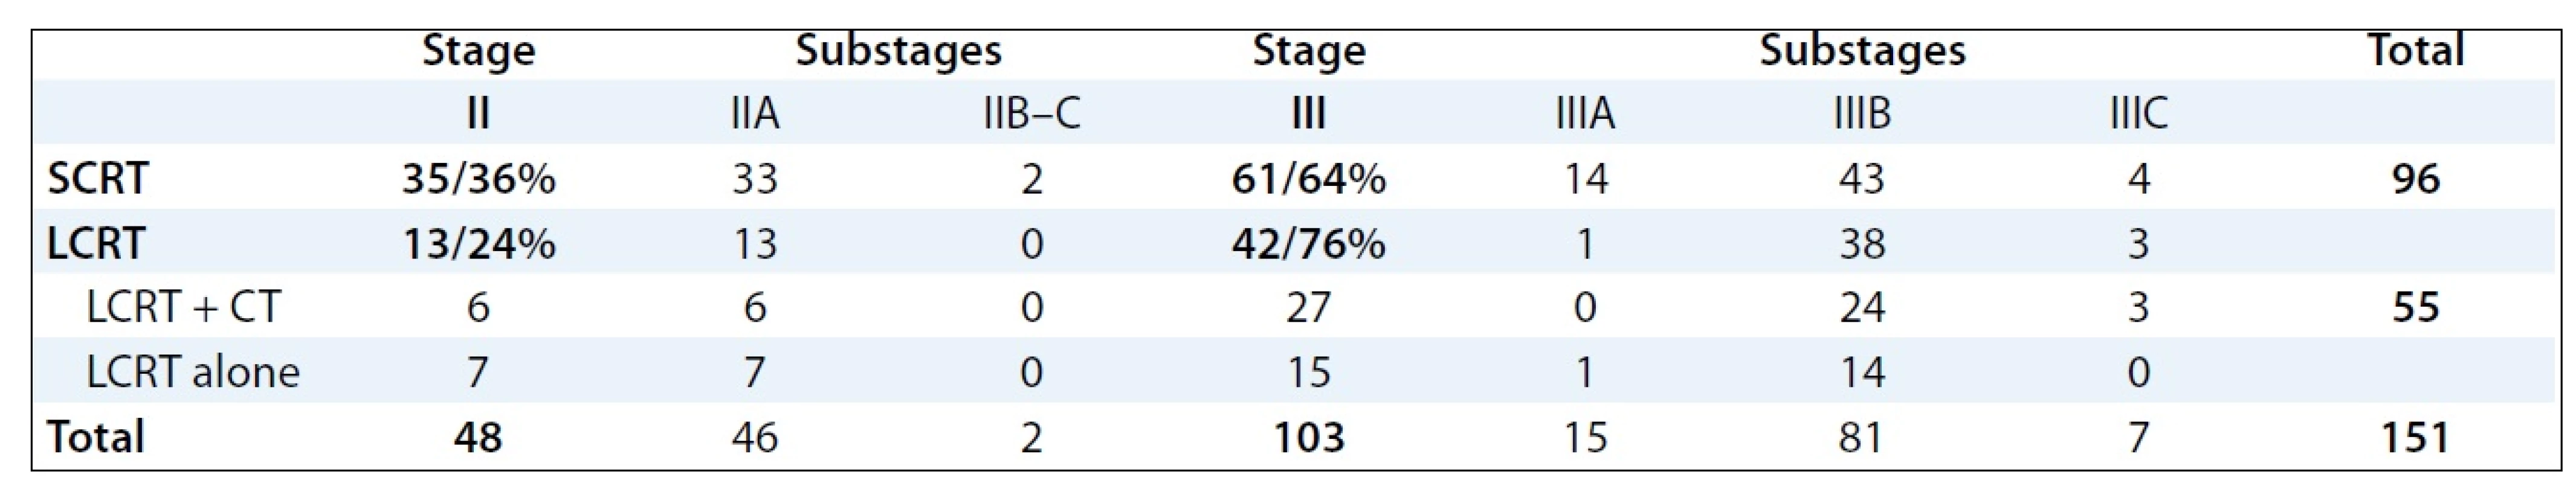 Preoperative radiotherapy treatment according to stage of disease (no of patients).